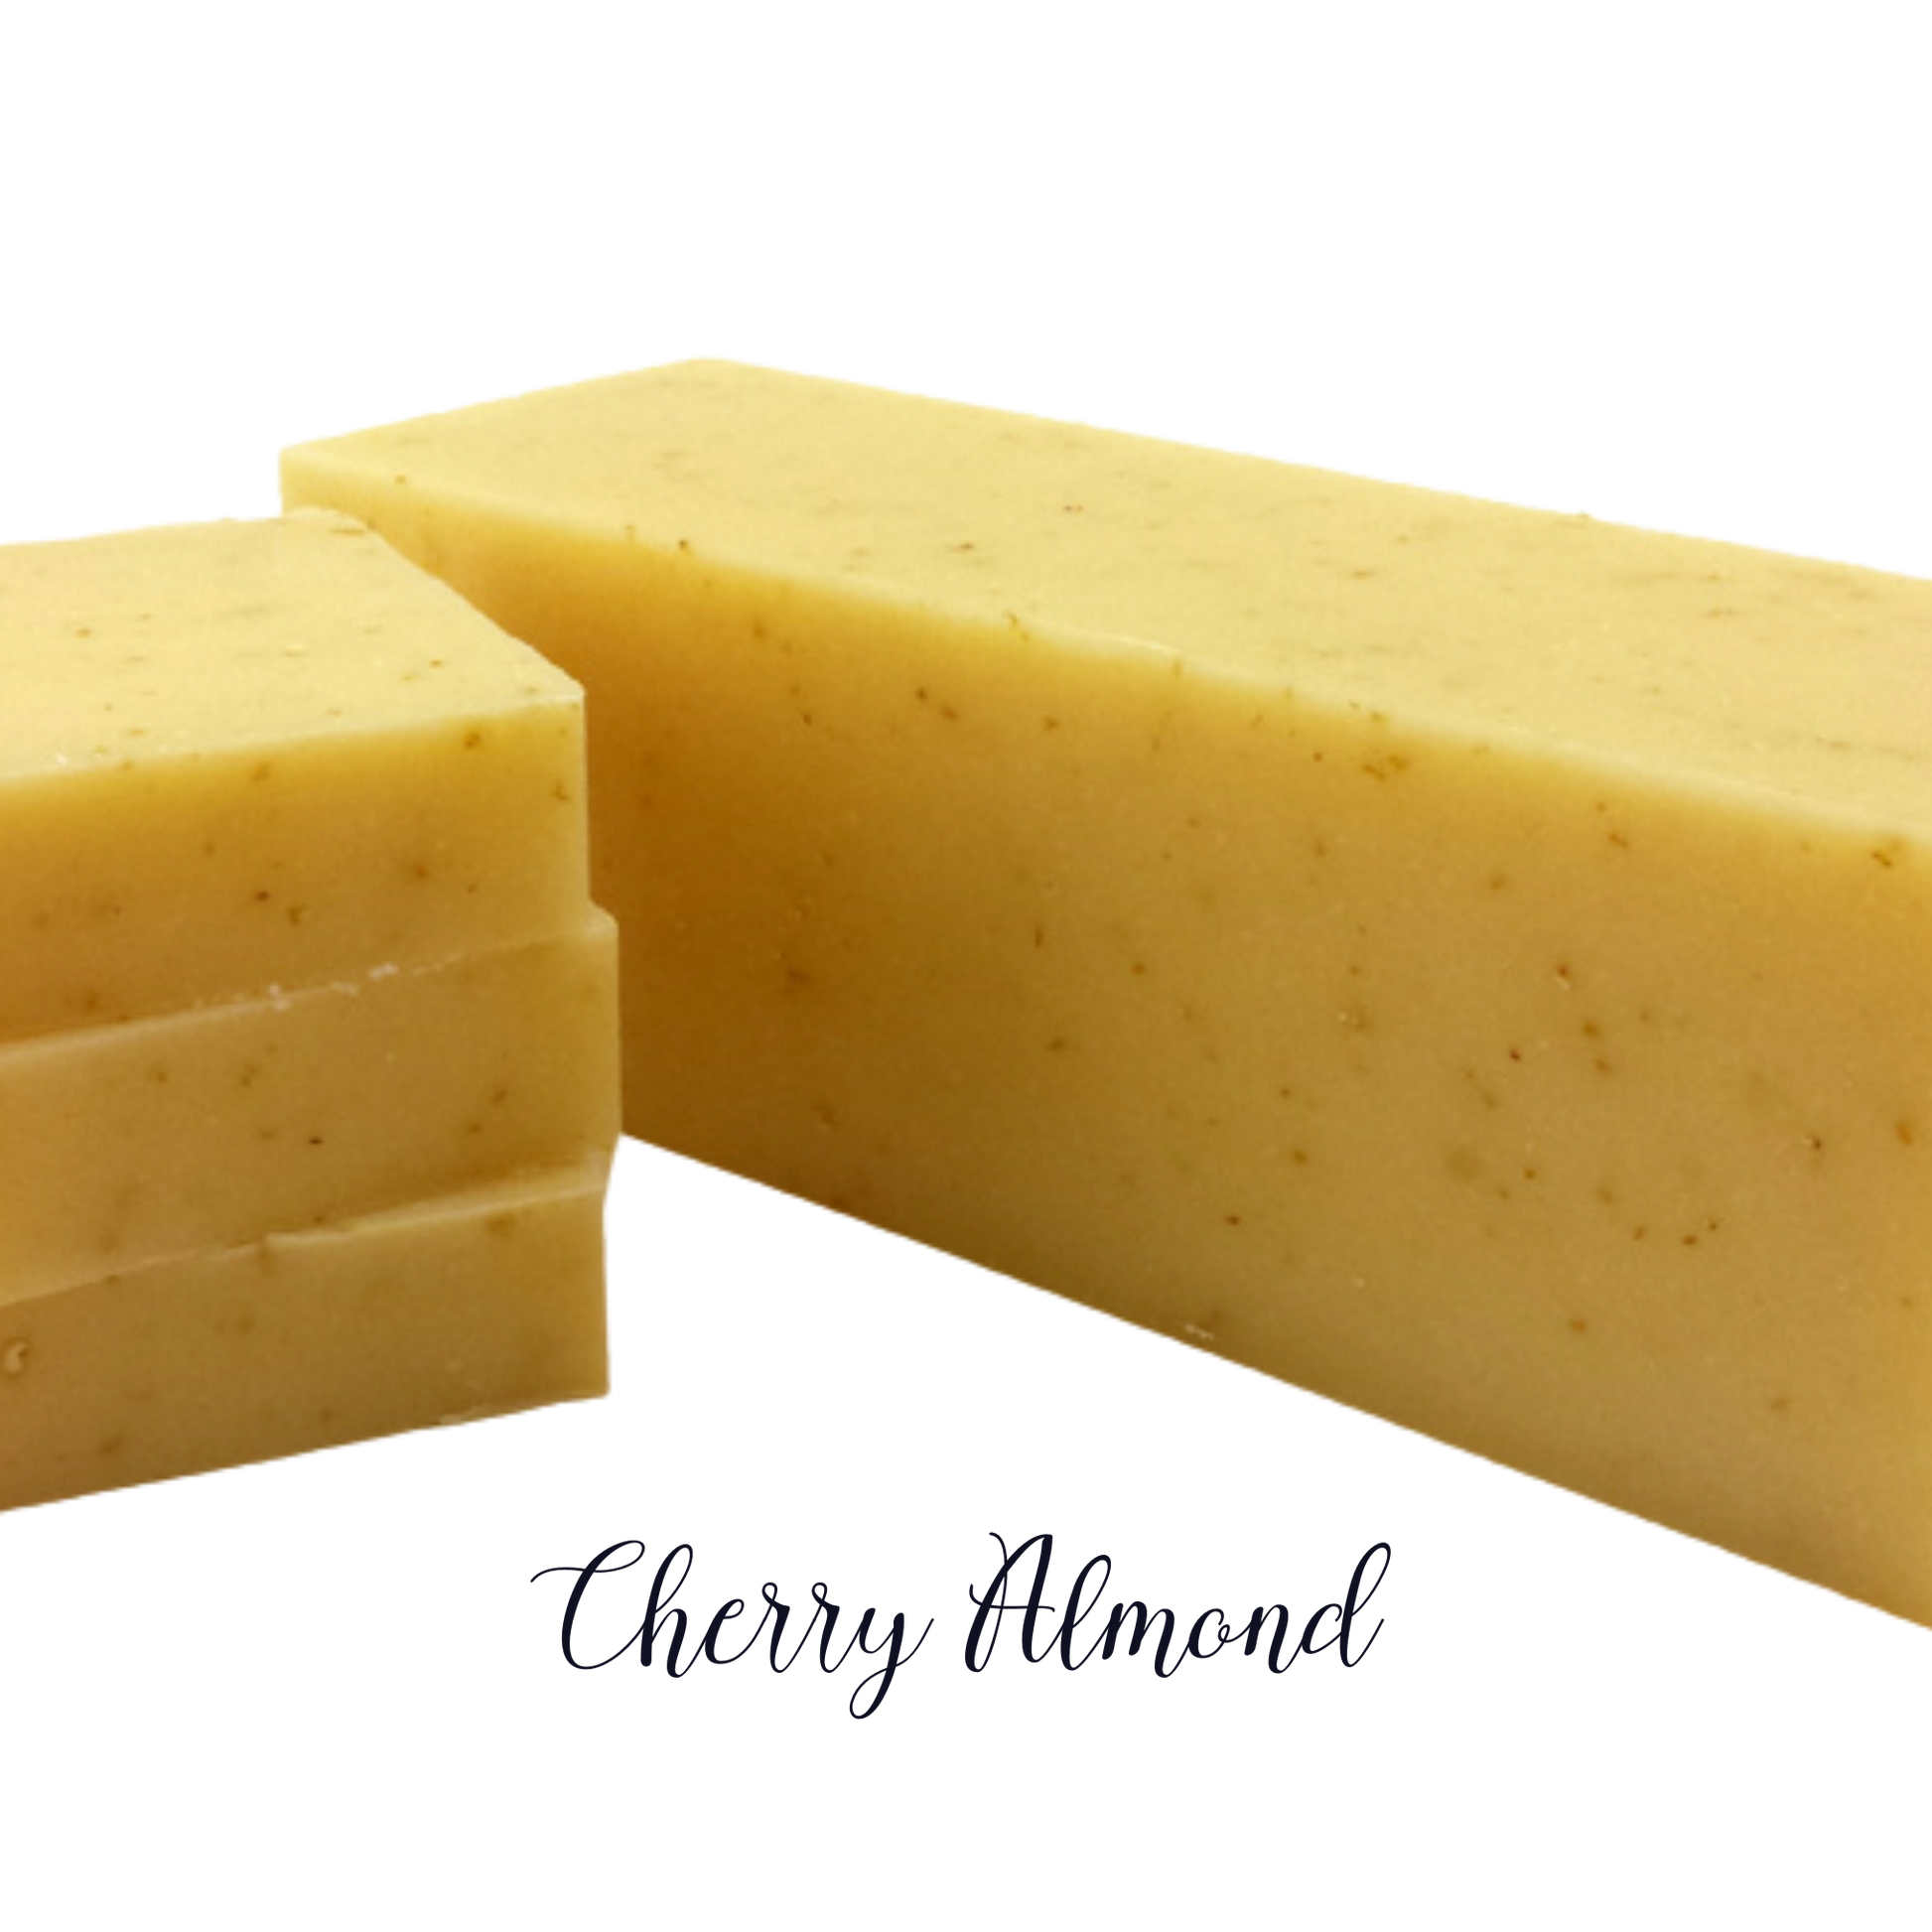 Smells like roasted almonds and wild cherries. Contains ground oatmeal as an exfoliate.. 5.5 oz soap